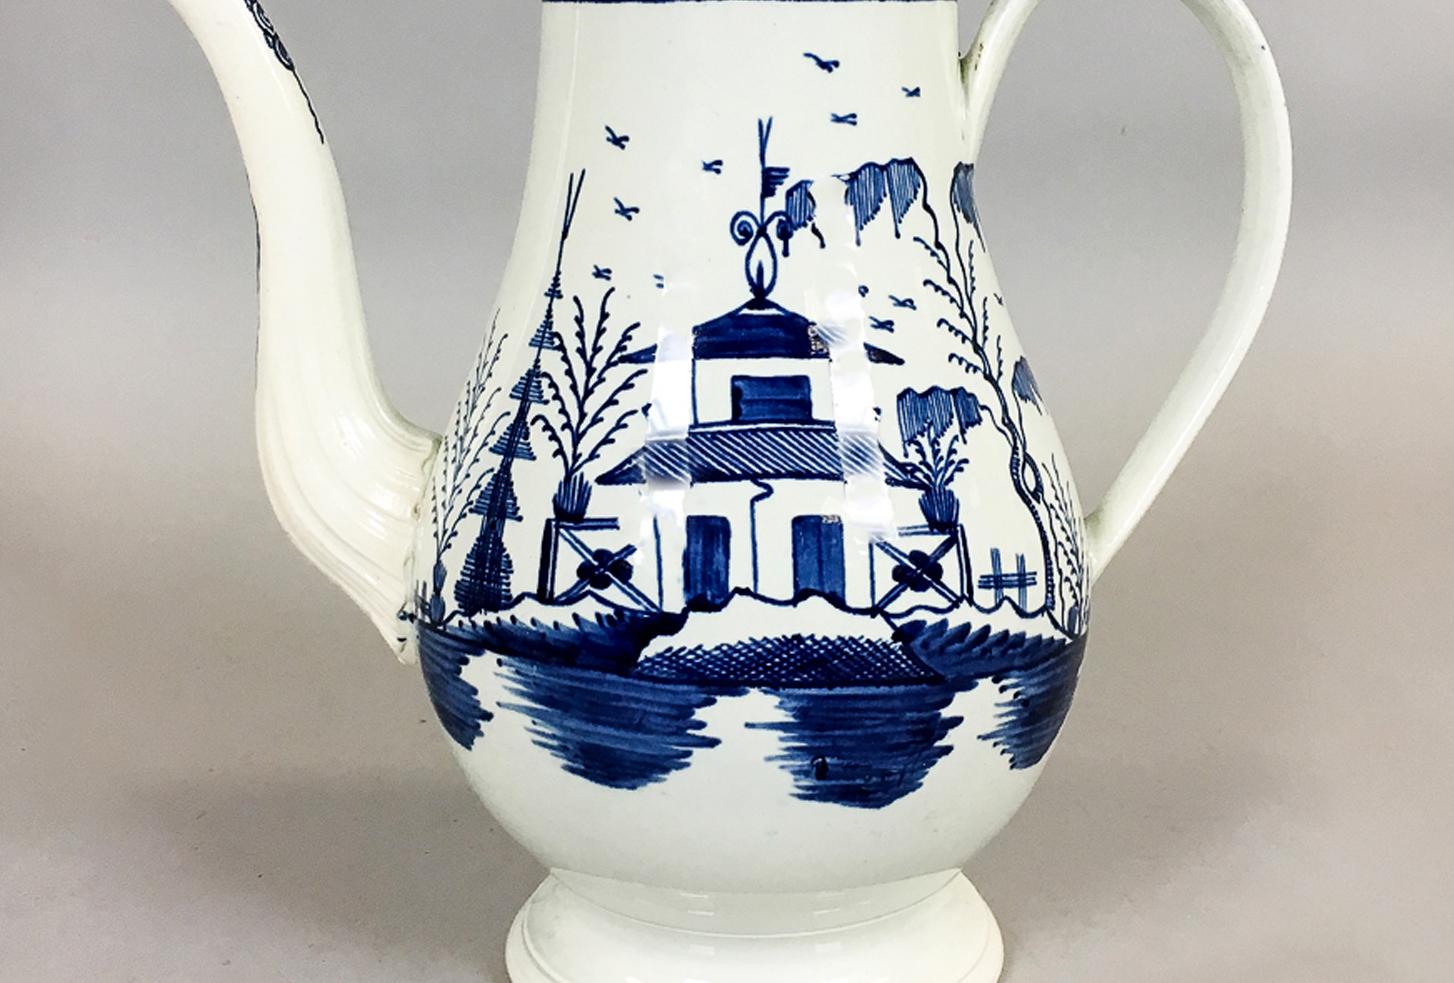 Blue and white pearlware 18th century coffeepot, 
Circa 1785

The Staffordshire chinoiserie pearlware coffeepot is painted in underglaze blue with a chinoiserie scene of a Chinese building is a landscape.

Height: 11 3/4 inches.

Provenance: The